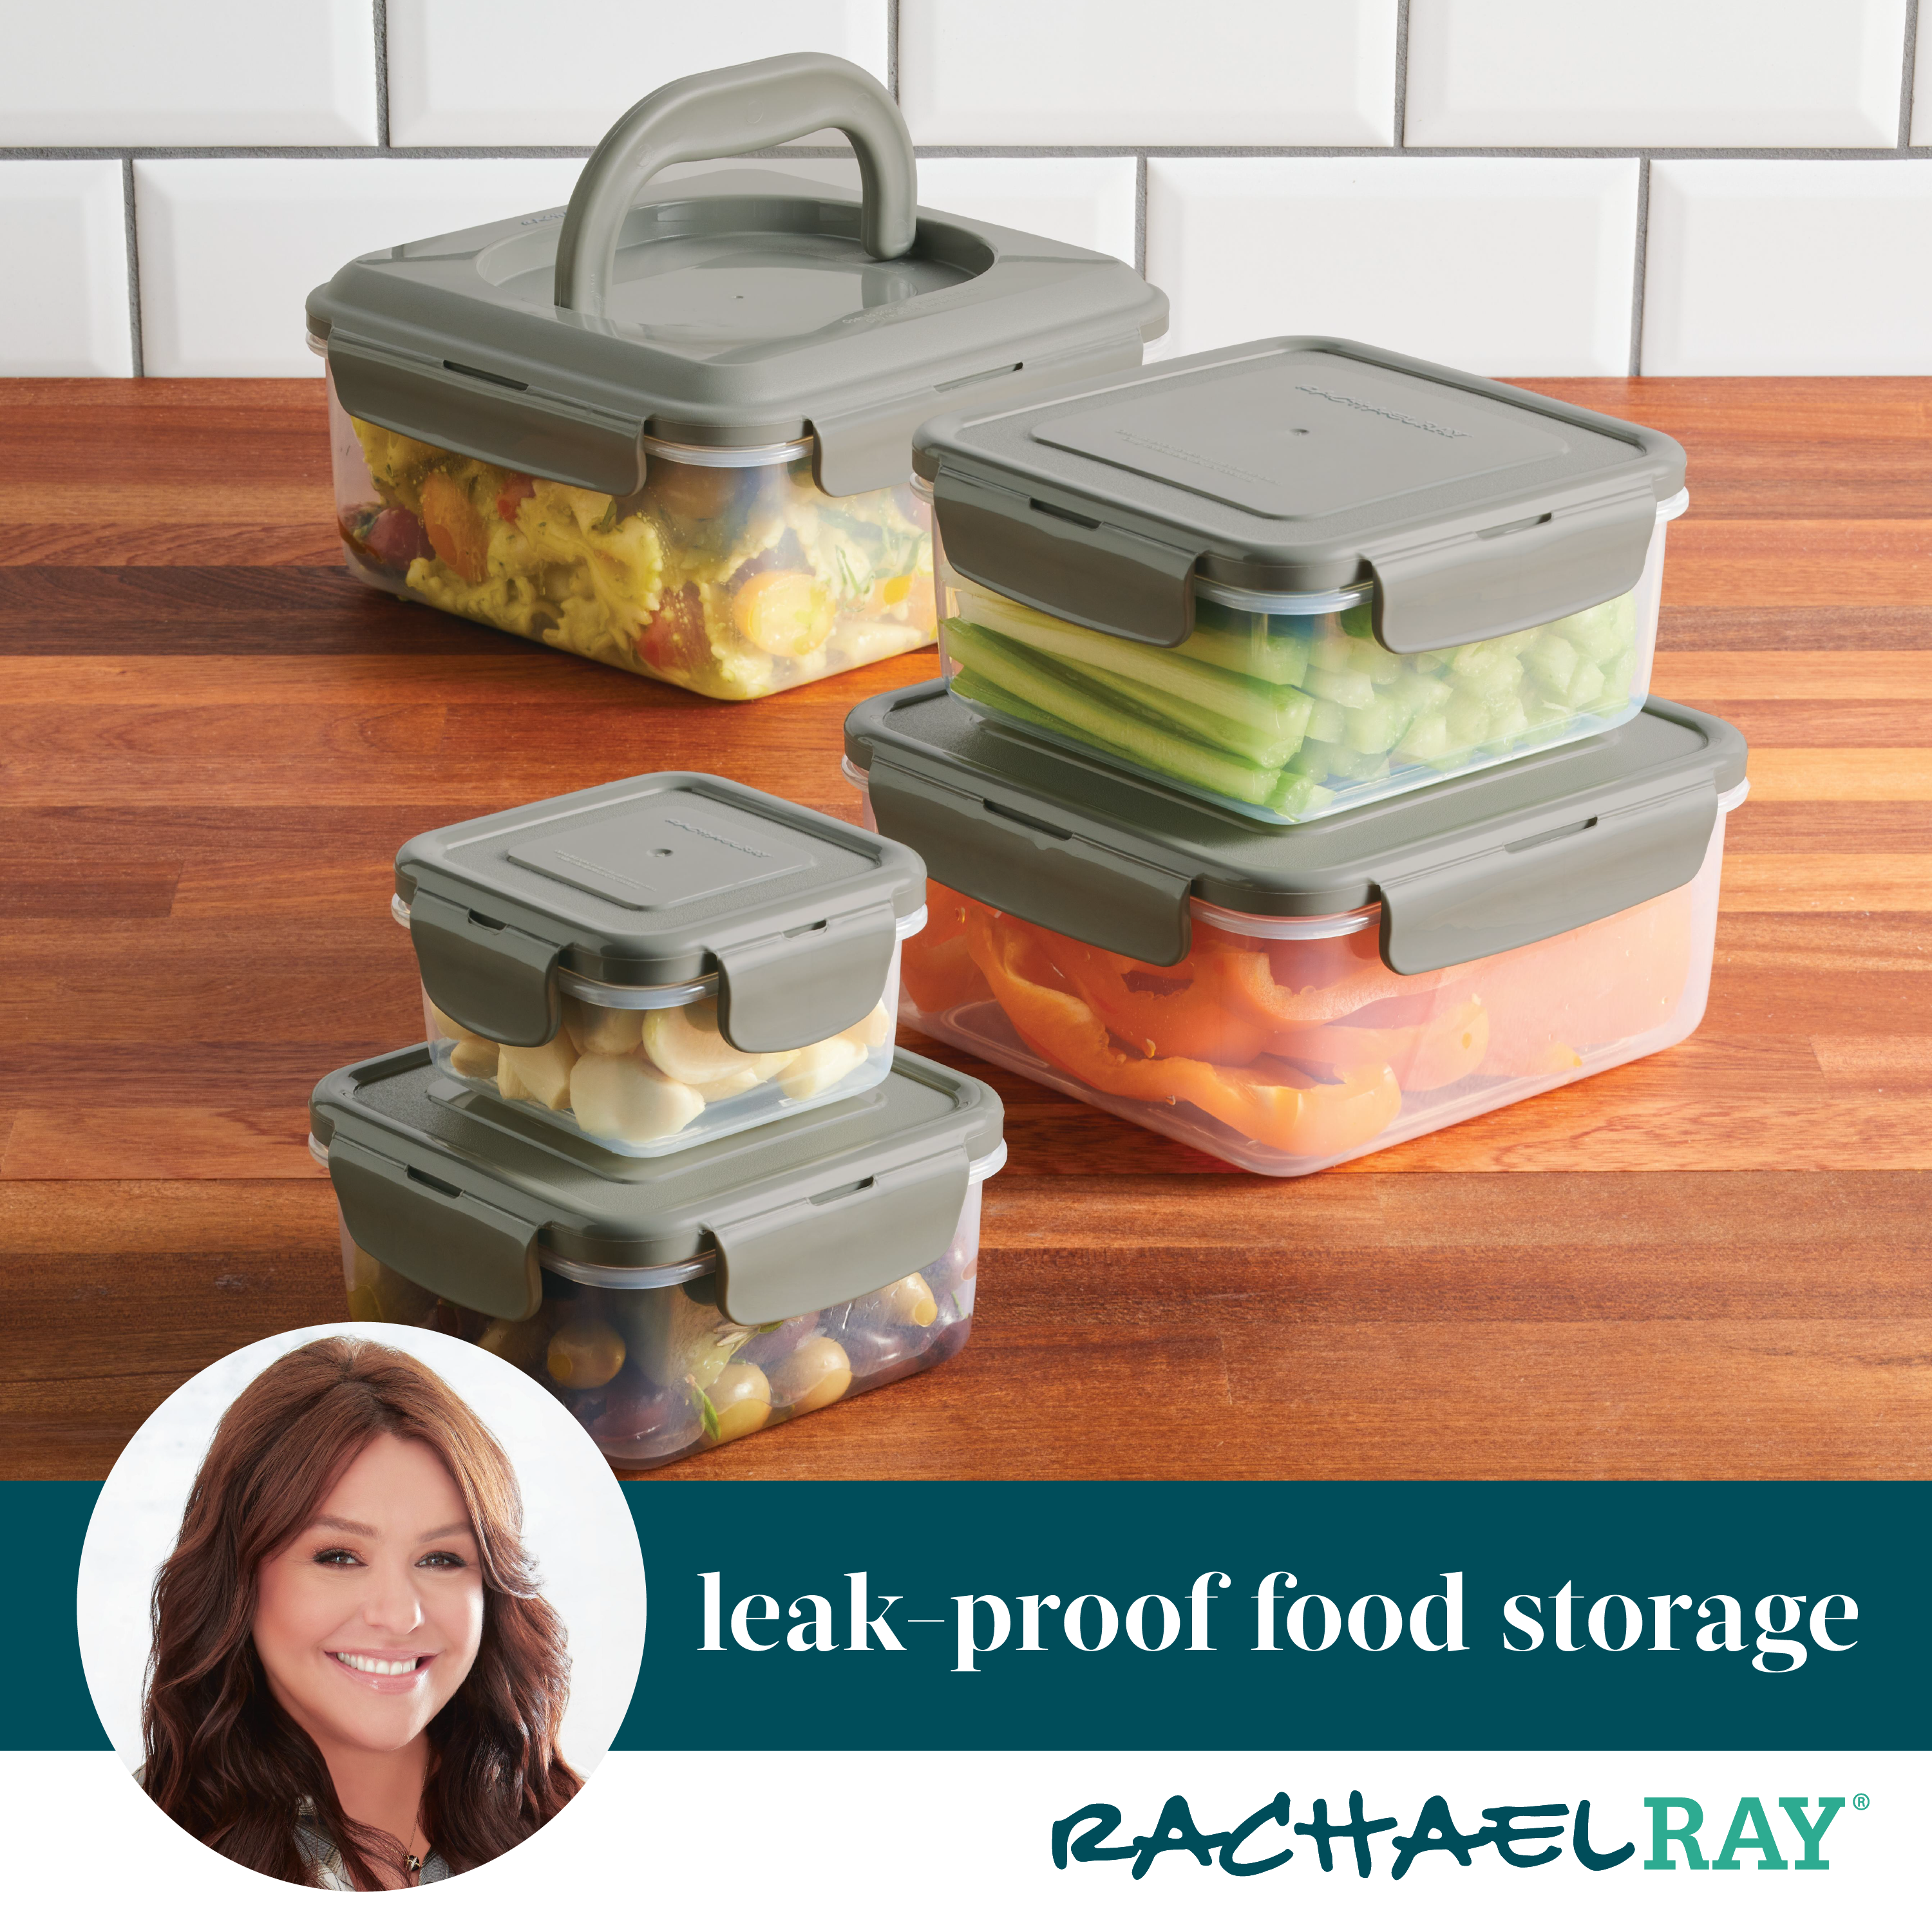 Everyday Living Square Stackable Storage Bin - Clear, 1 ct - Fry's